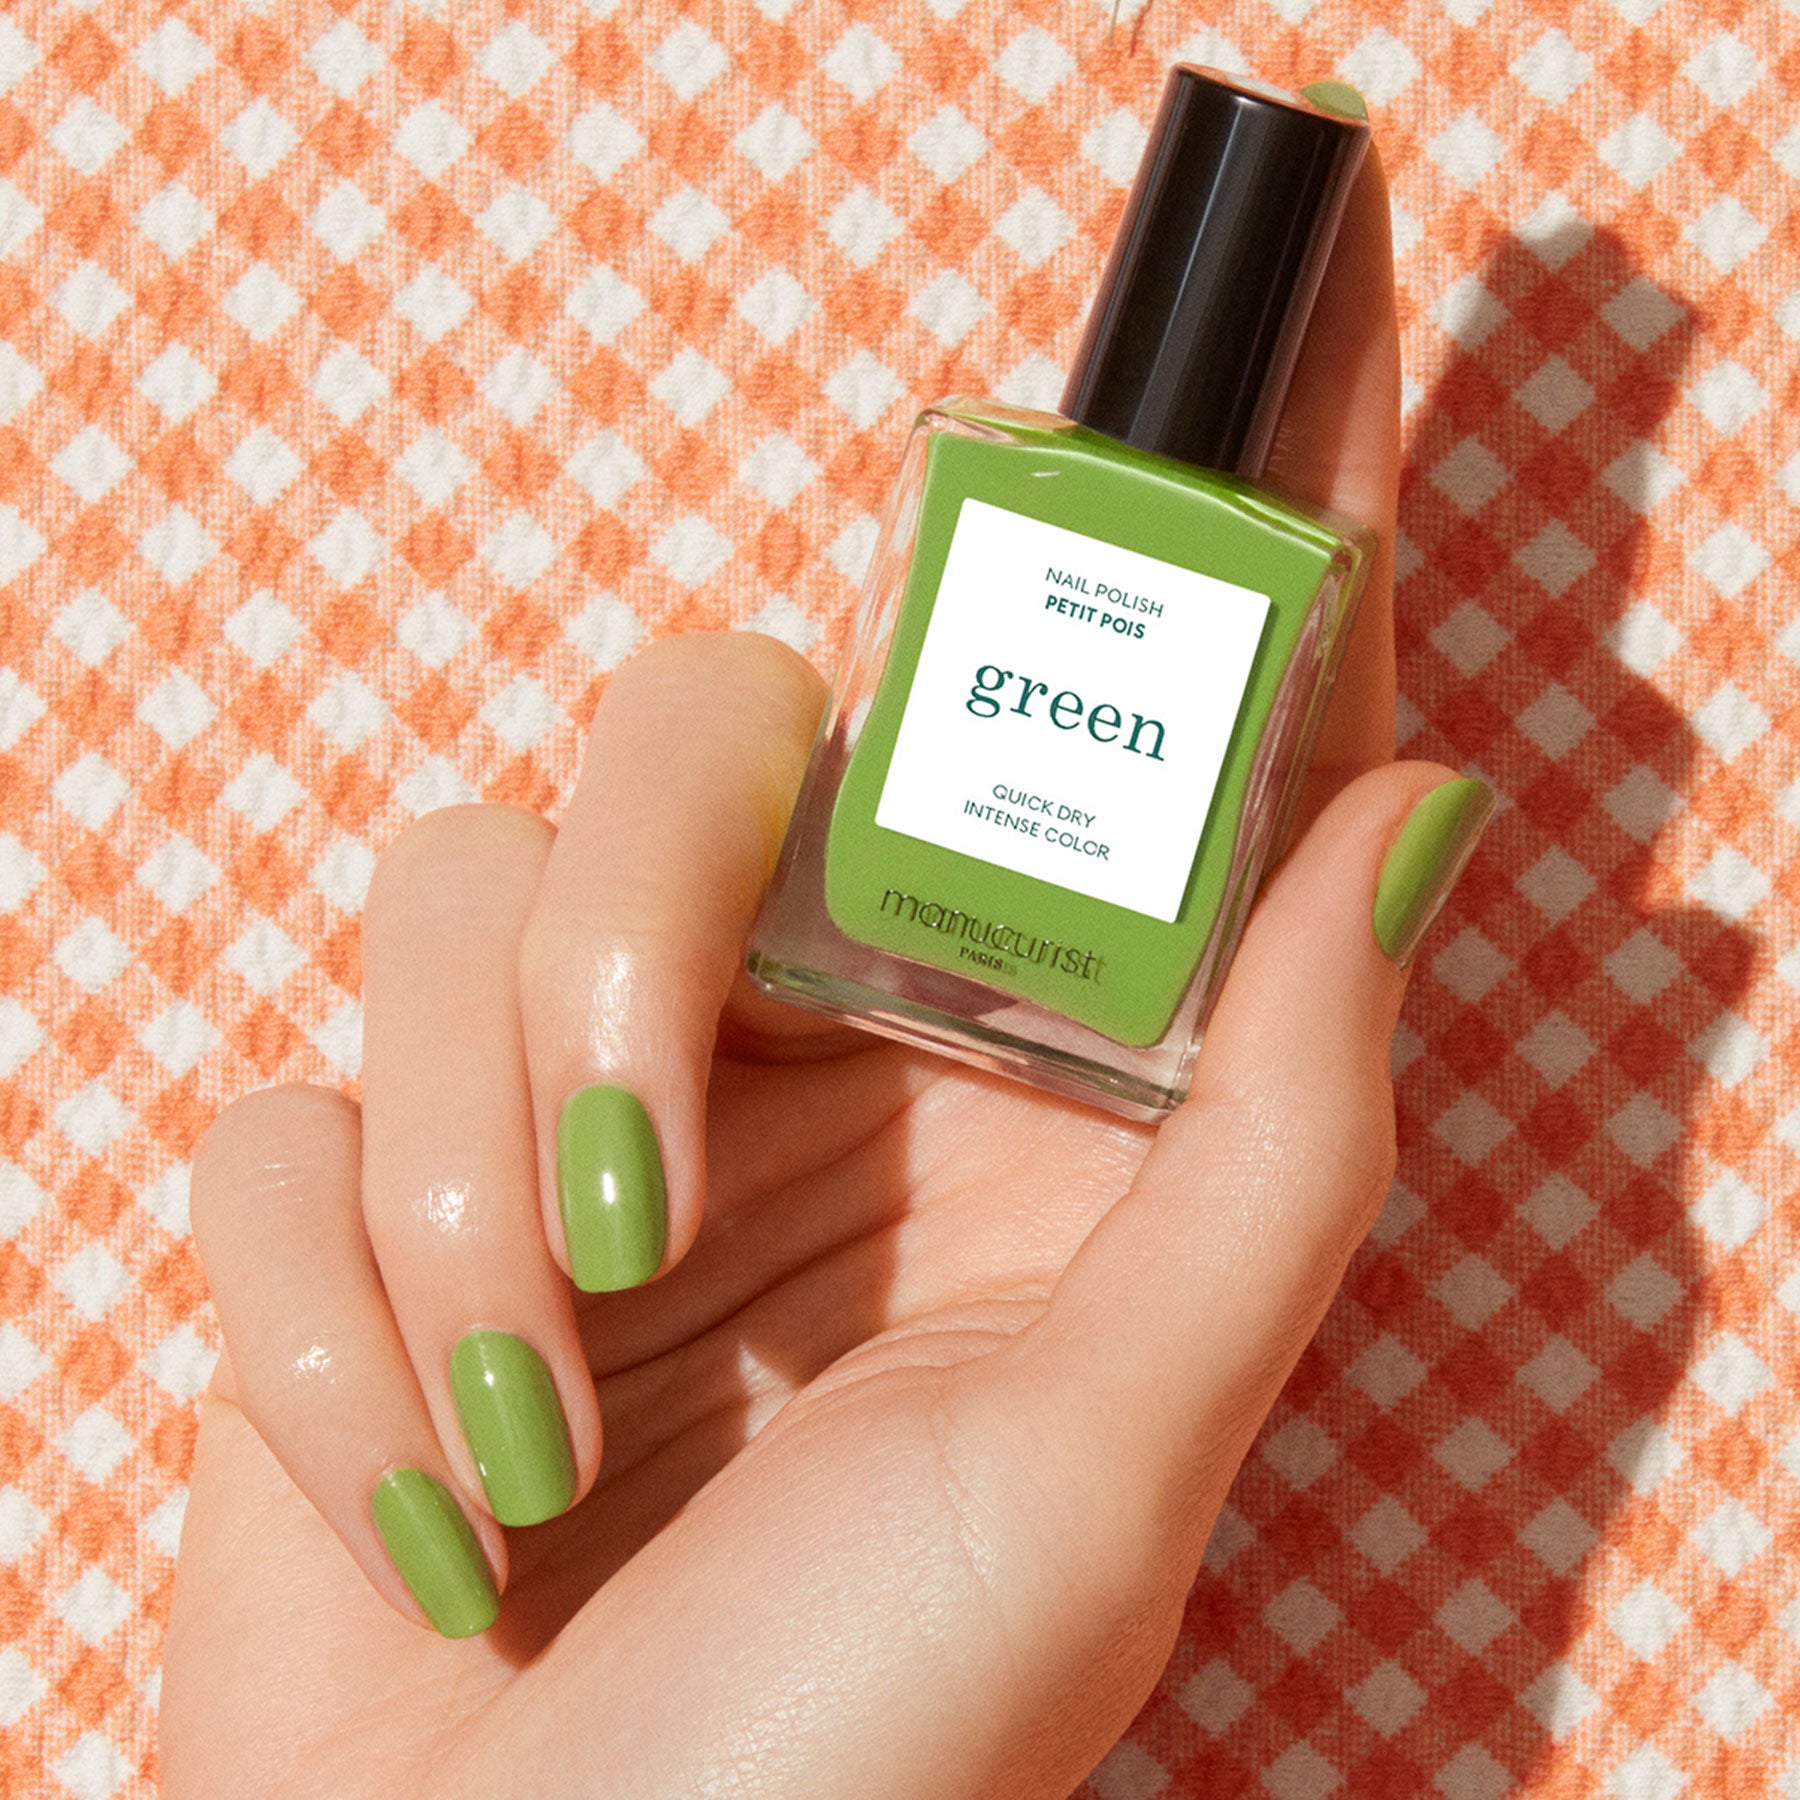 My favorite color is green so I try mostly green shades on my nails; is  this a good color for me? Also stopped getting my nails done and just  growing out +